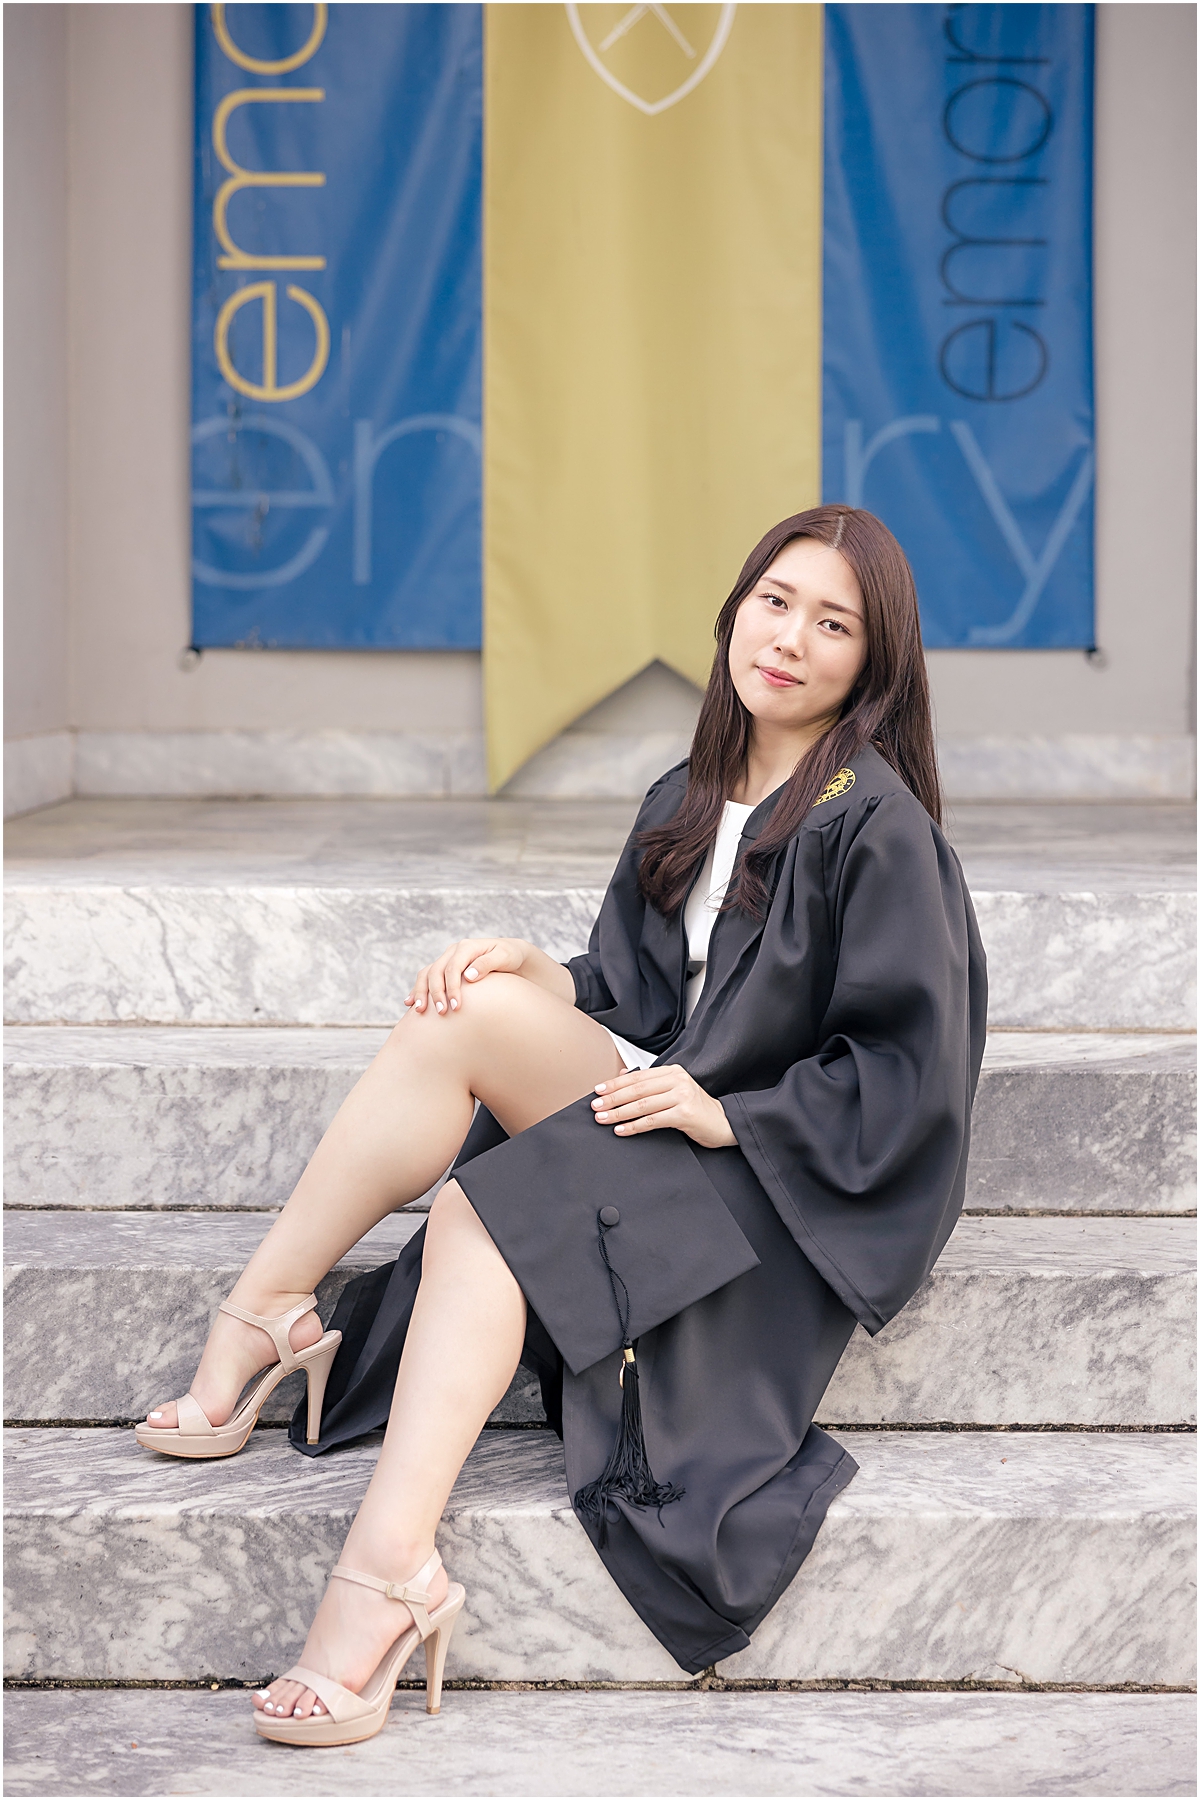 Female sitting on steps in front of gold and blue banner smiling at an Emory University Senior Photographer while she wears her open graduation gown to reveal a white dress and holds her black graduation cap